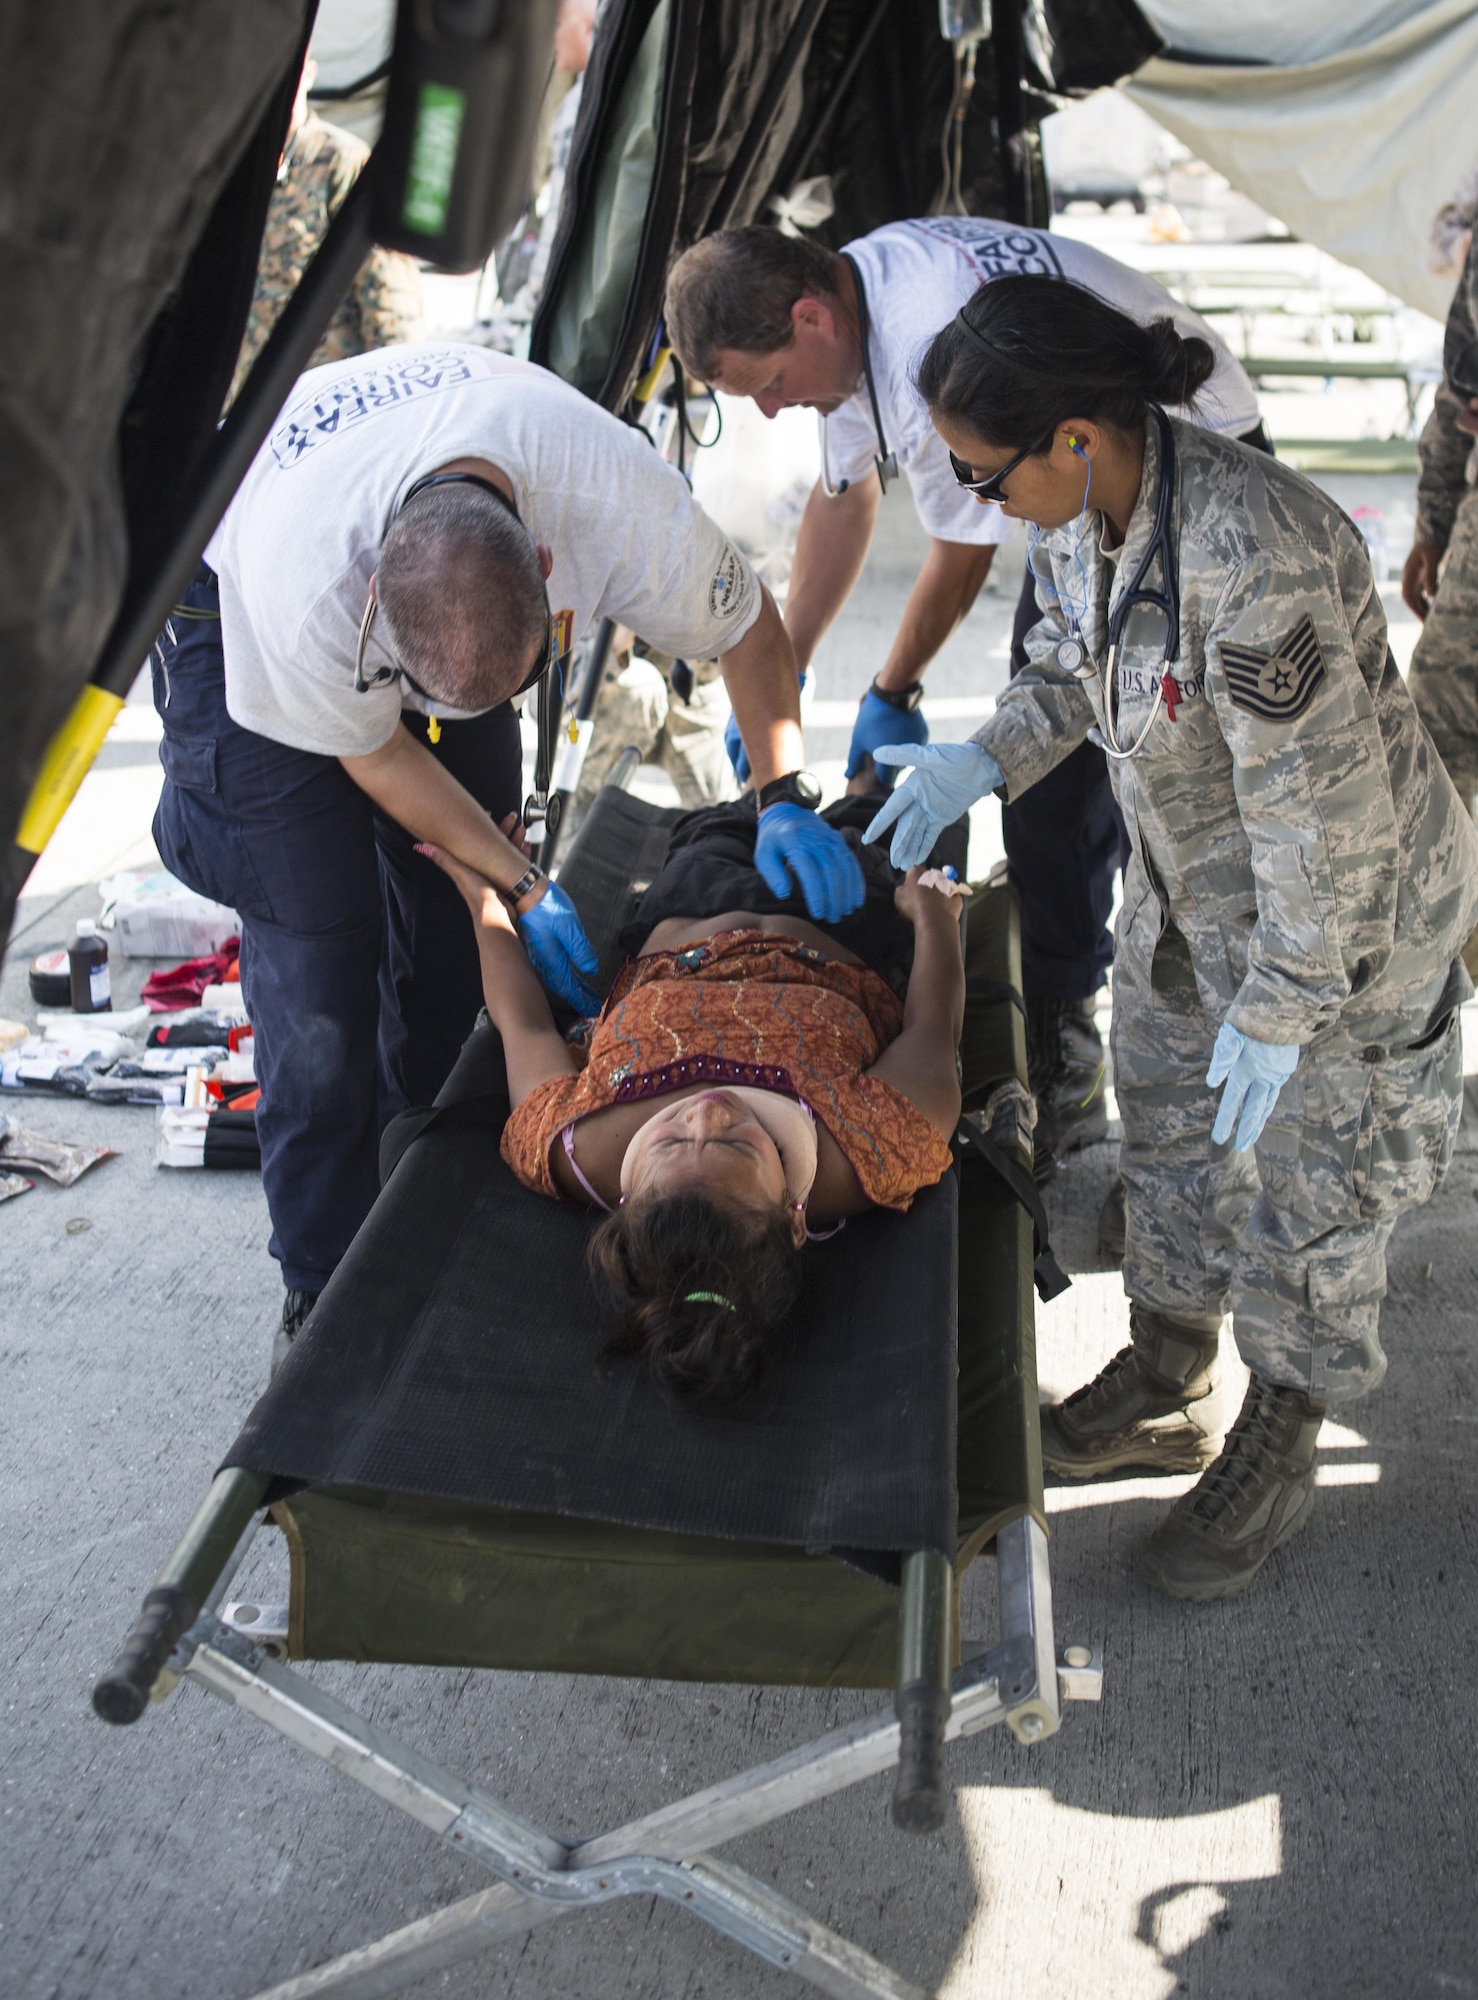 An Airman with Joint Task Force-505, along with rescue and medical personnel, provide aid to an earthquake victim at a medical triage area at Tribhuvan International Airport, Kathmandu, Nepal, after a 7.3 magnitude-earthquake struck the country, May 12, 2015. JTF-505, along with other multinational forces and humanitarian relief organizations have been providing aid after a 7.8-magnitude earthquake struck the country, April 25. At Nepal's request the U.S. government ordered JTF-505 to provide unique capabilities to assist Nepal. (U.S. Marine Corps photo/Staff Sgt. Jeffrey D. Anderson)